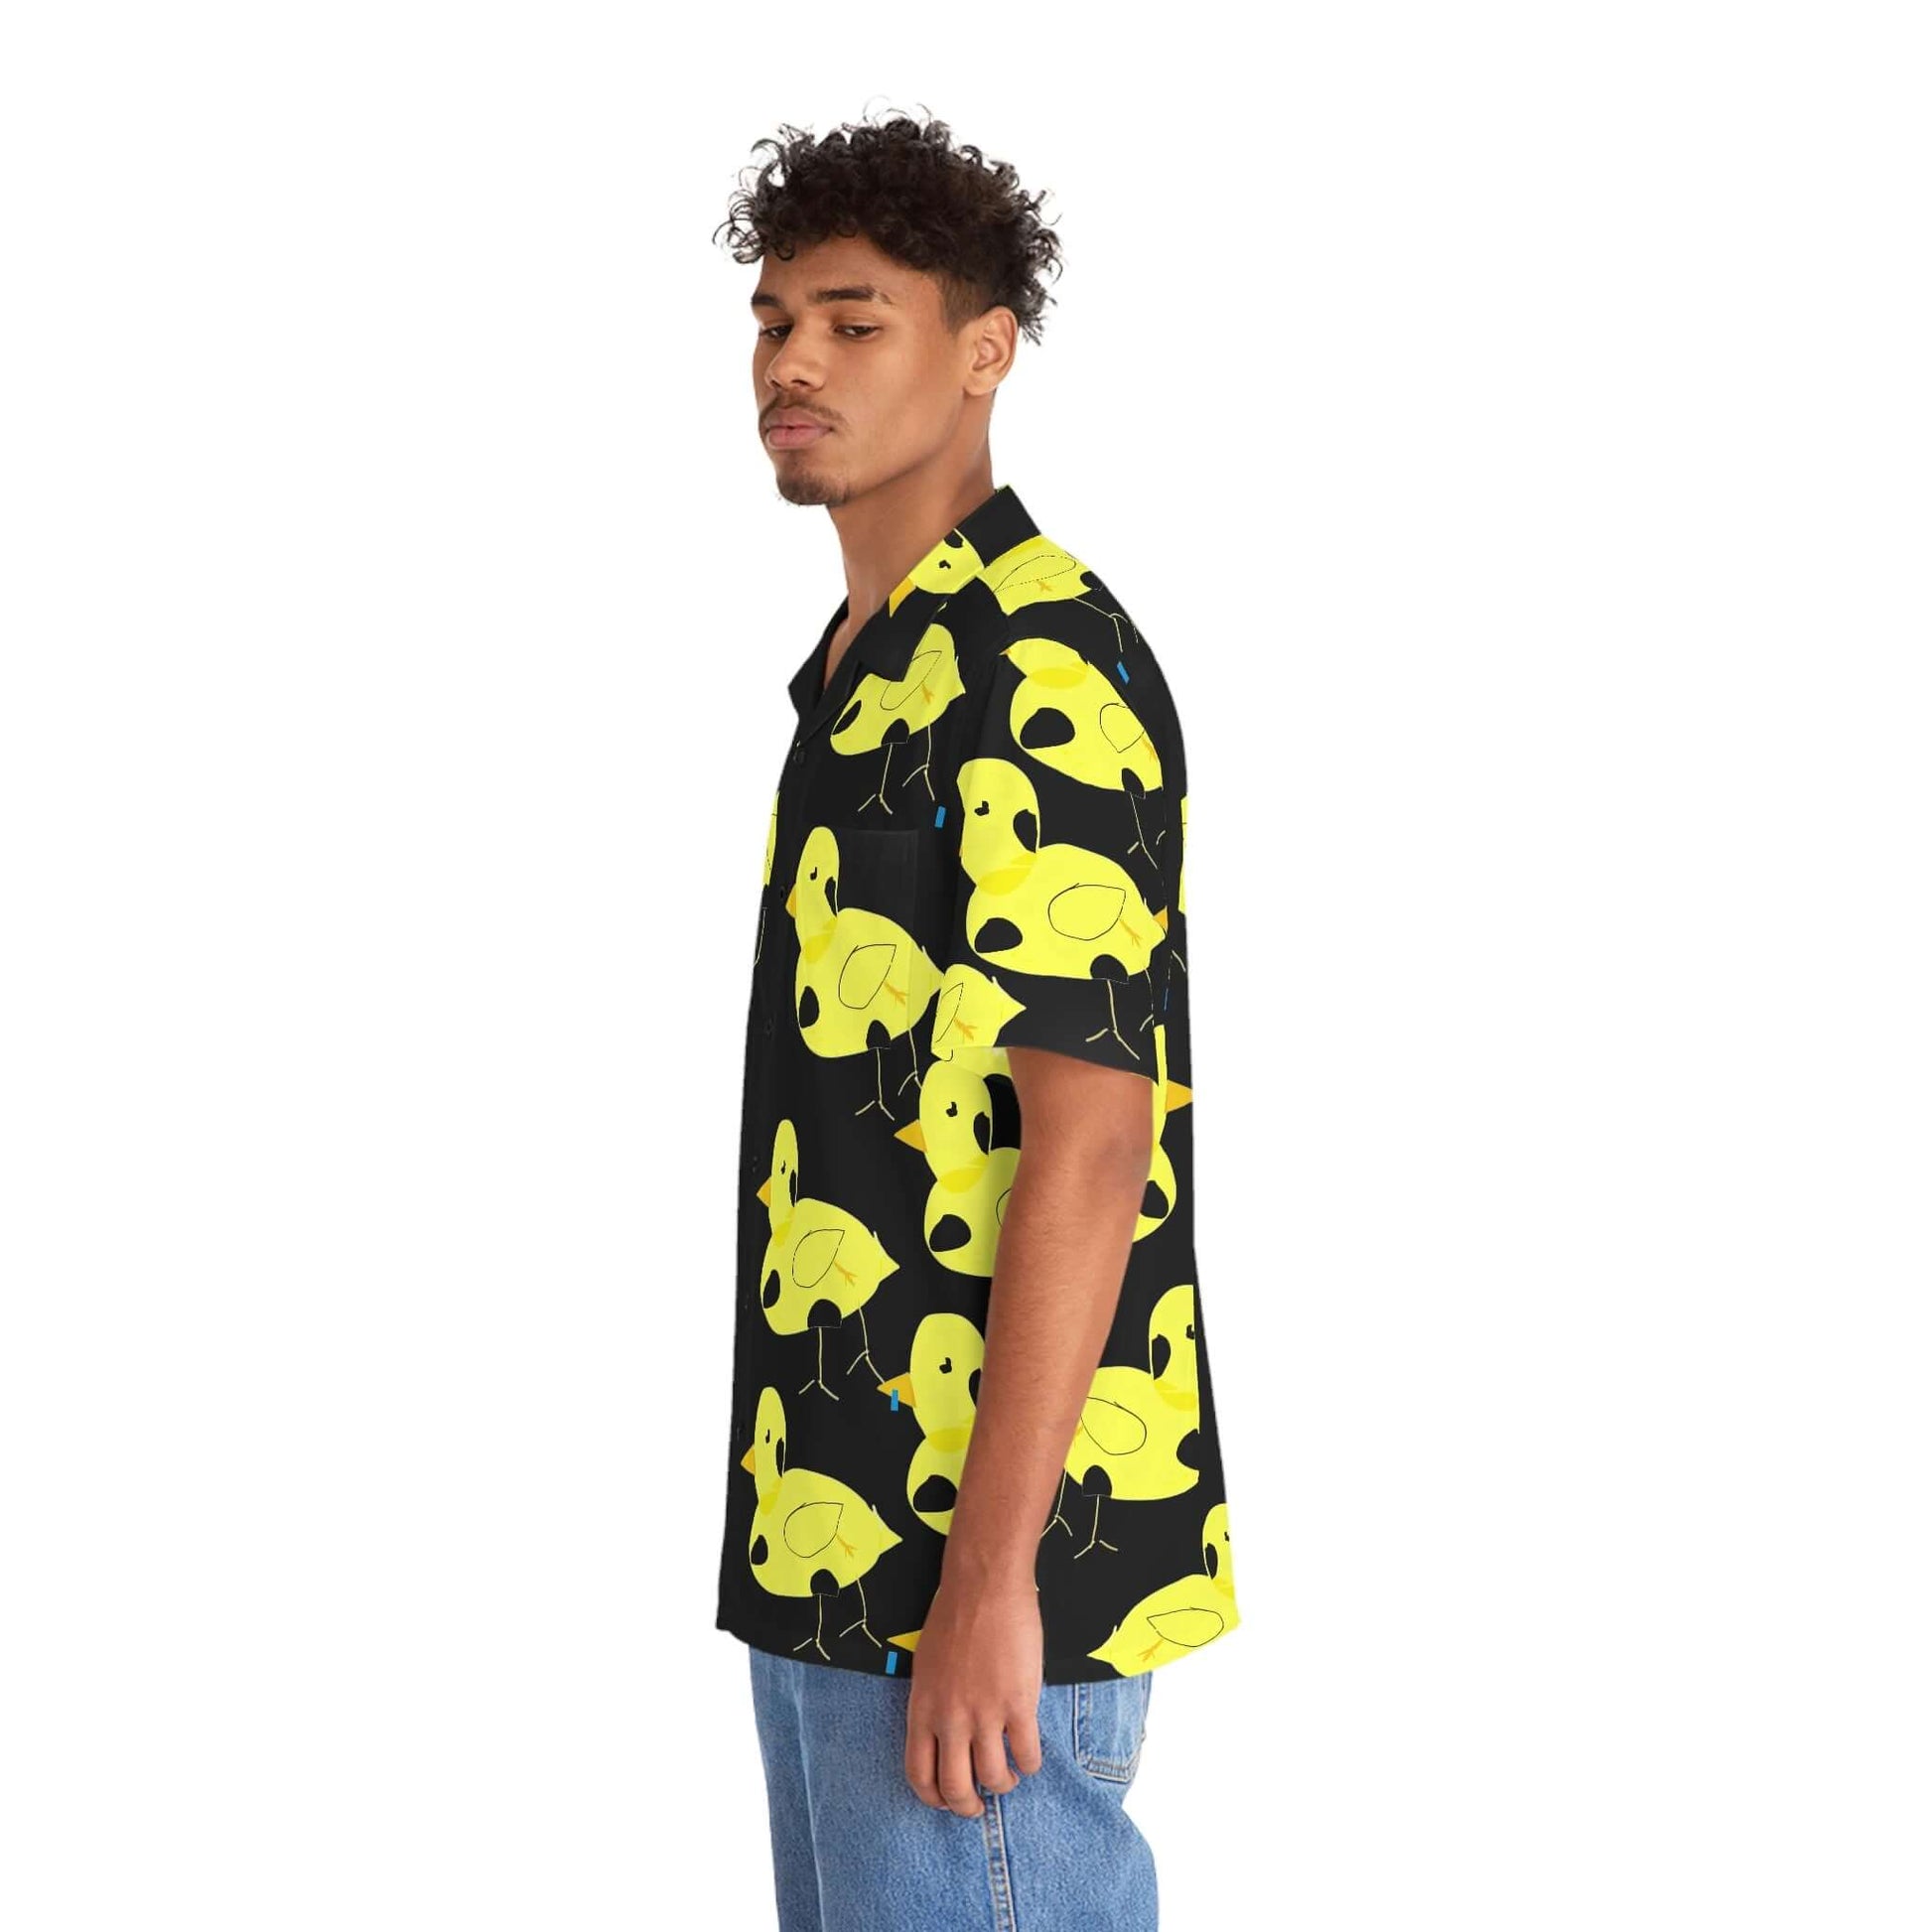 Black button up Black button up Hawaiian Shirt with bright yellow Four-Legged Chicken print by young disabled artist D.B.